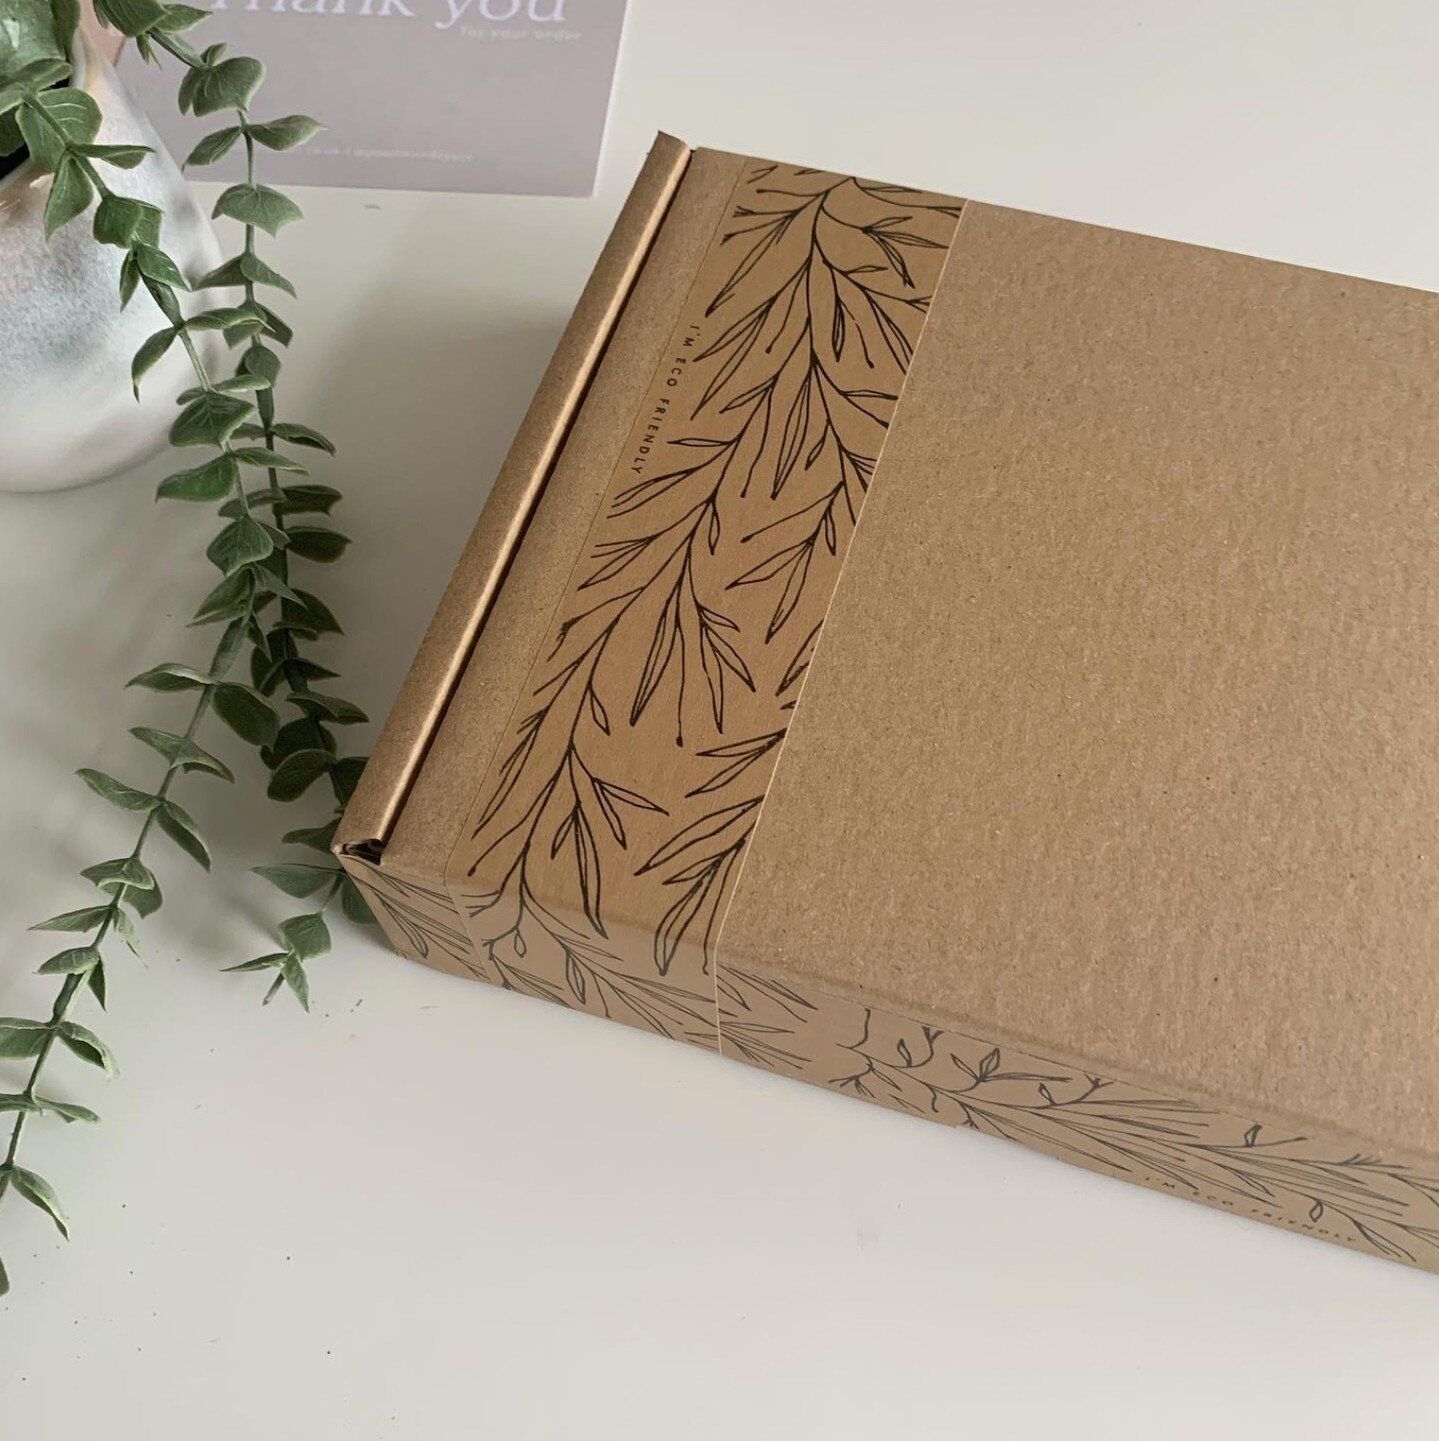 Sustainability 🌳⁣
⁣
The Good Mondays planner + packaging has been thoughtfully designed to create a product that is both beautiful and kinder to the environment.⁣
⁣
The planner includes:⁣
⁣
- recycled paper⁣
- faux leather⁣
- designed in UK and prin